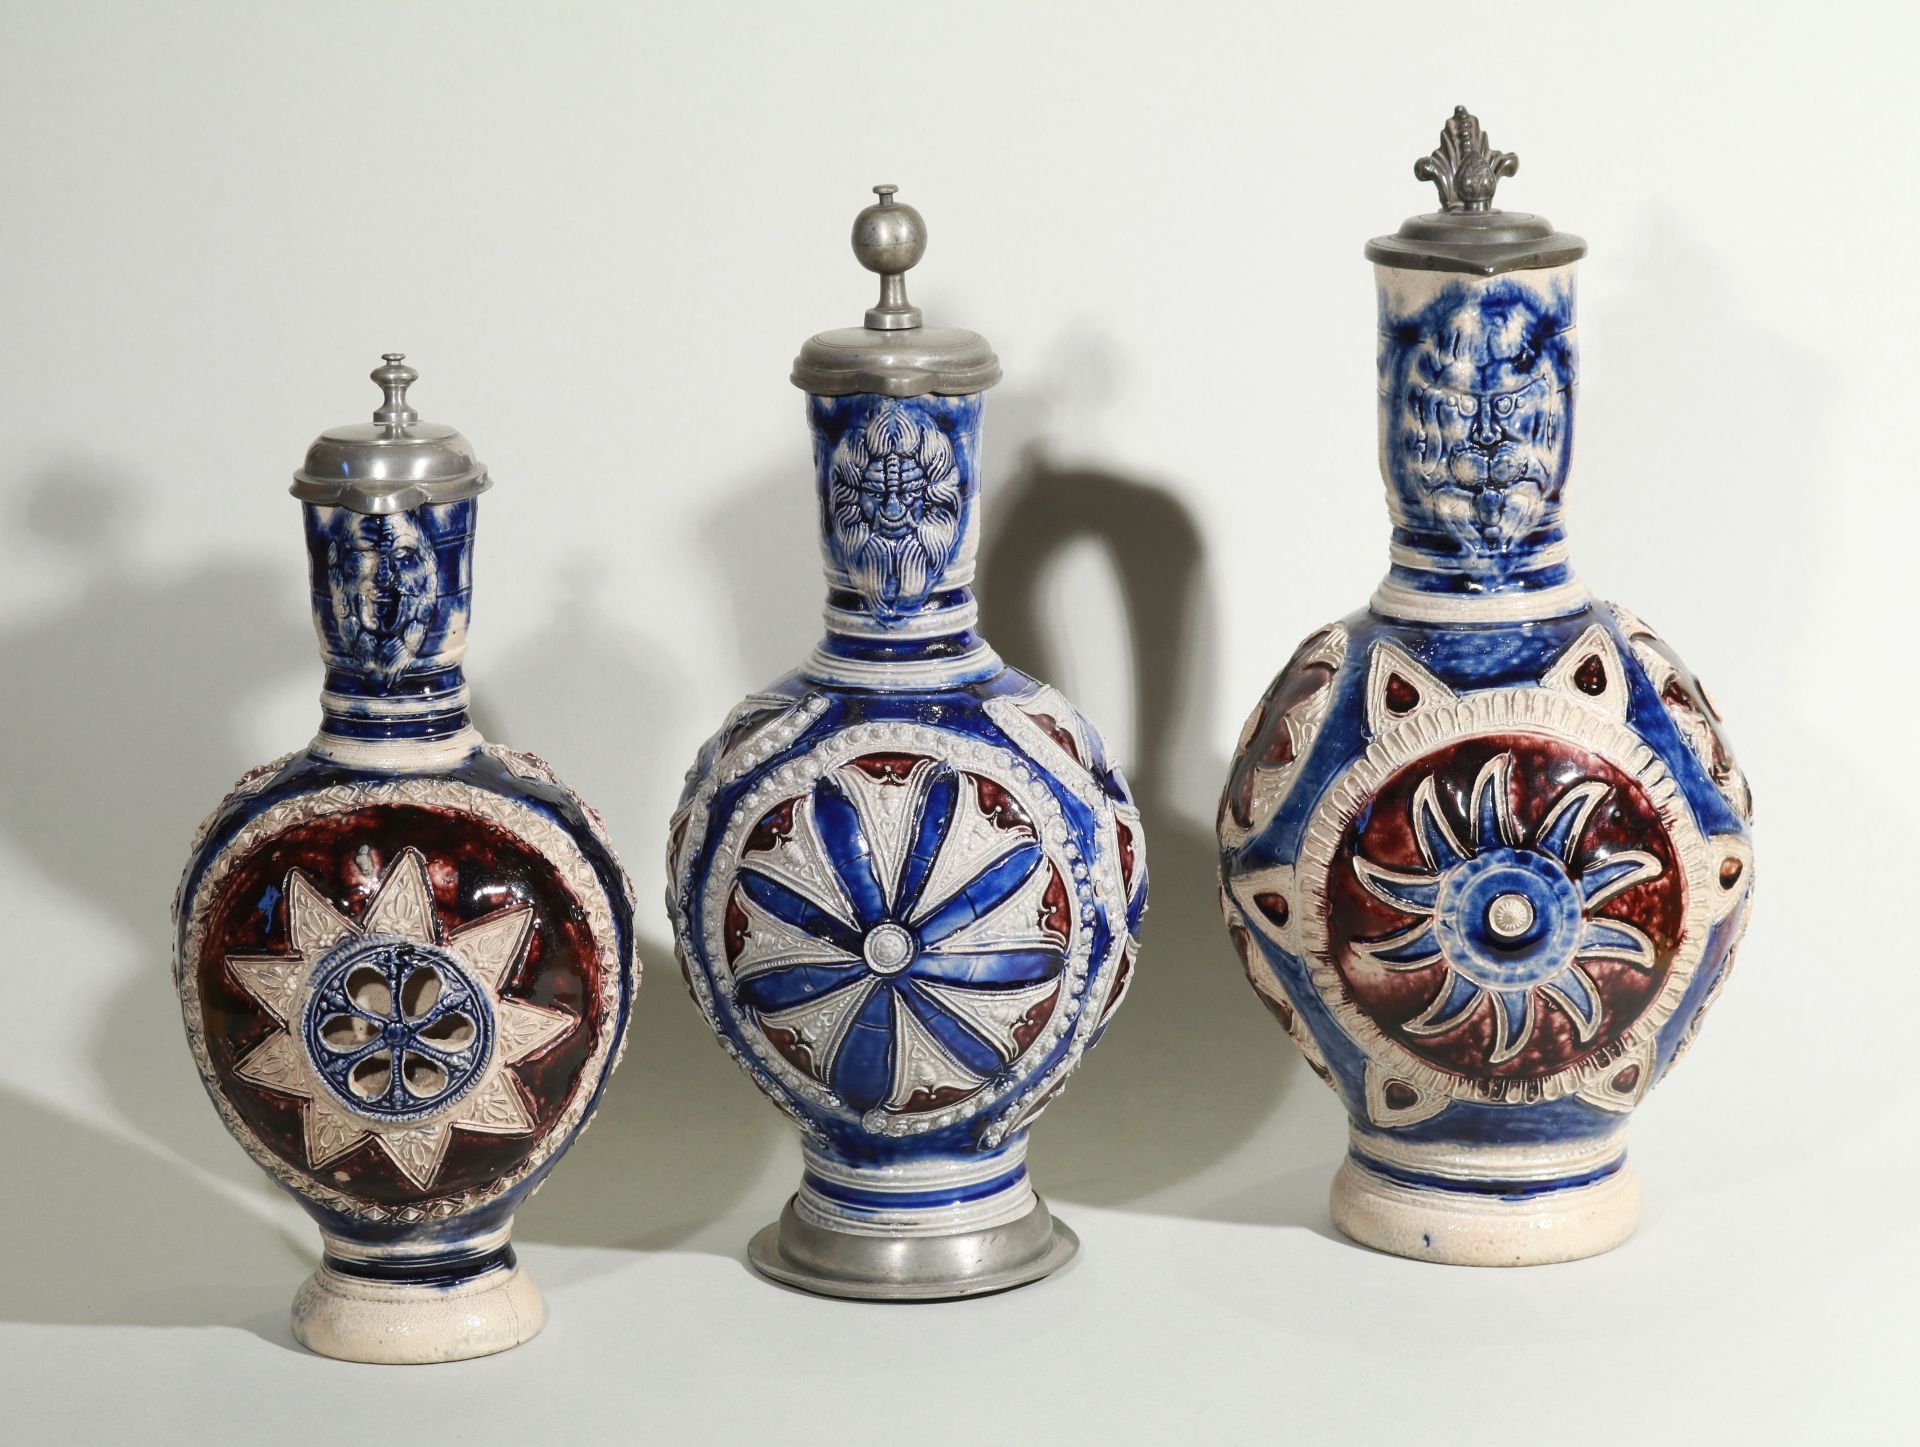 17th century works of art westerwald jugs with blue and manganese saltglaze